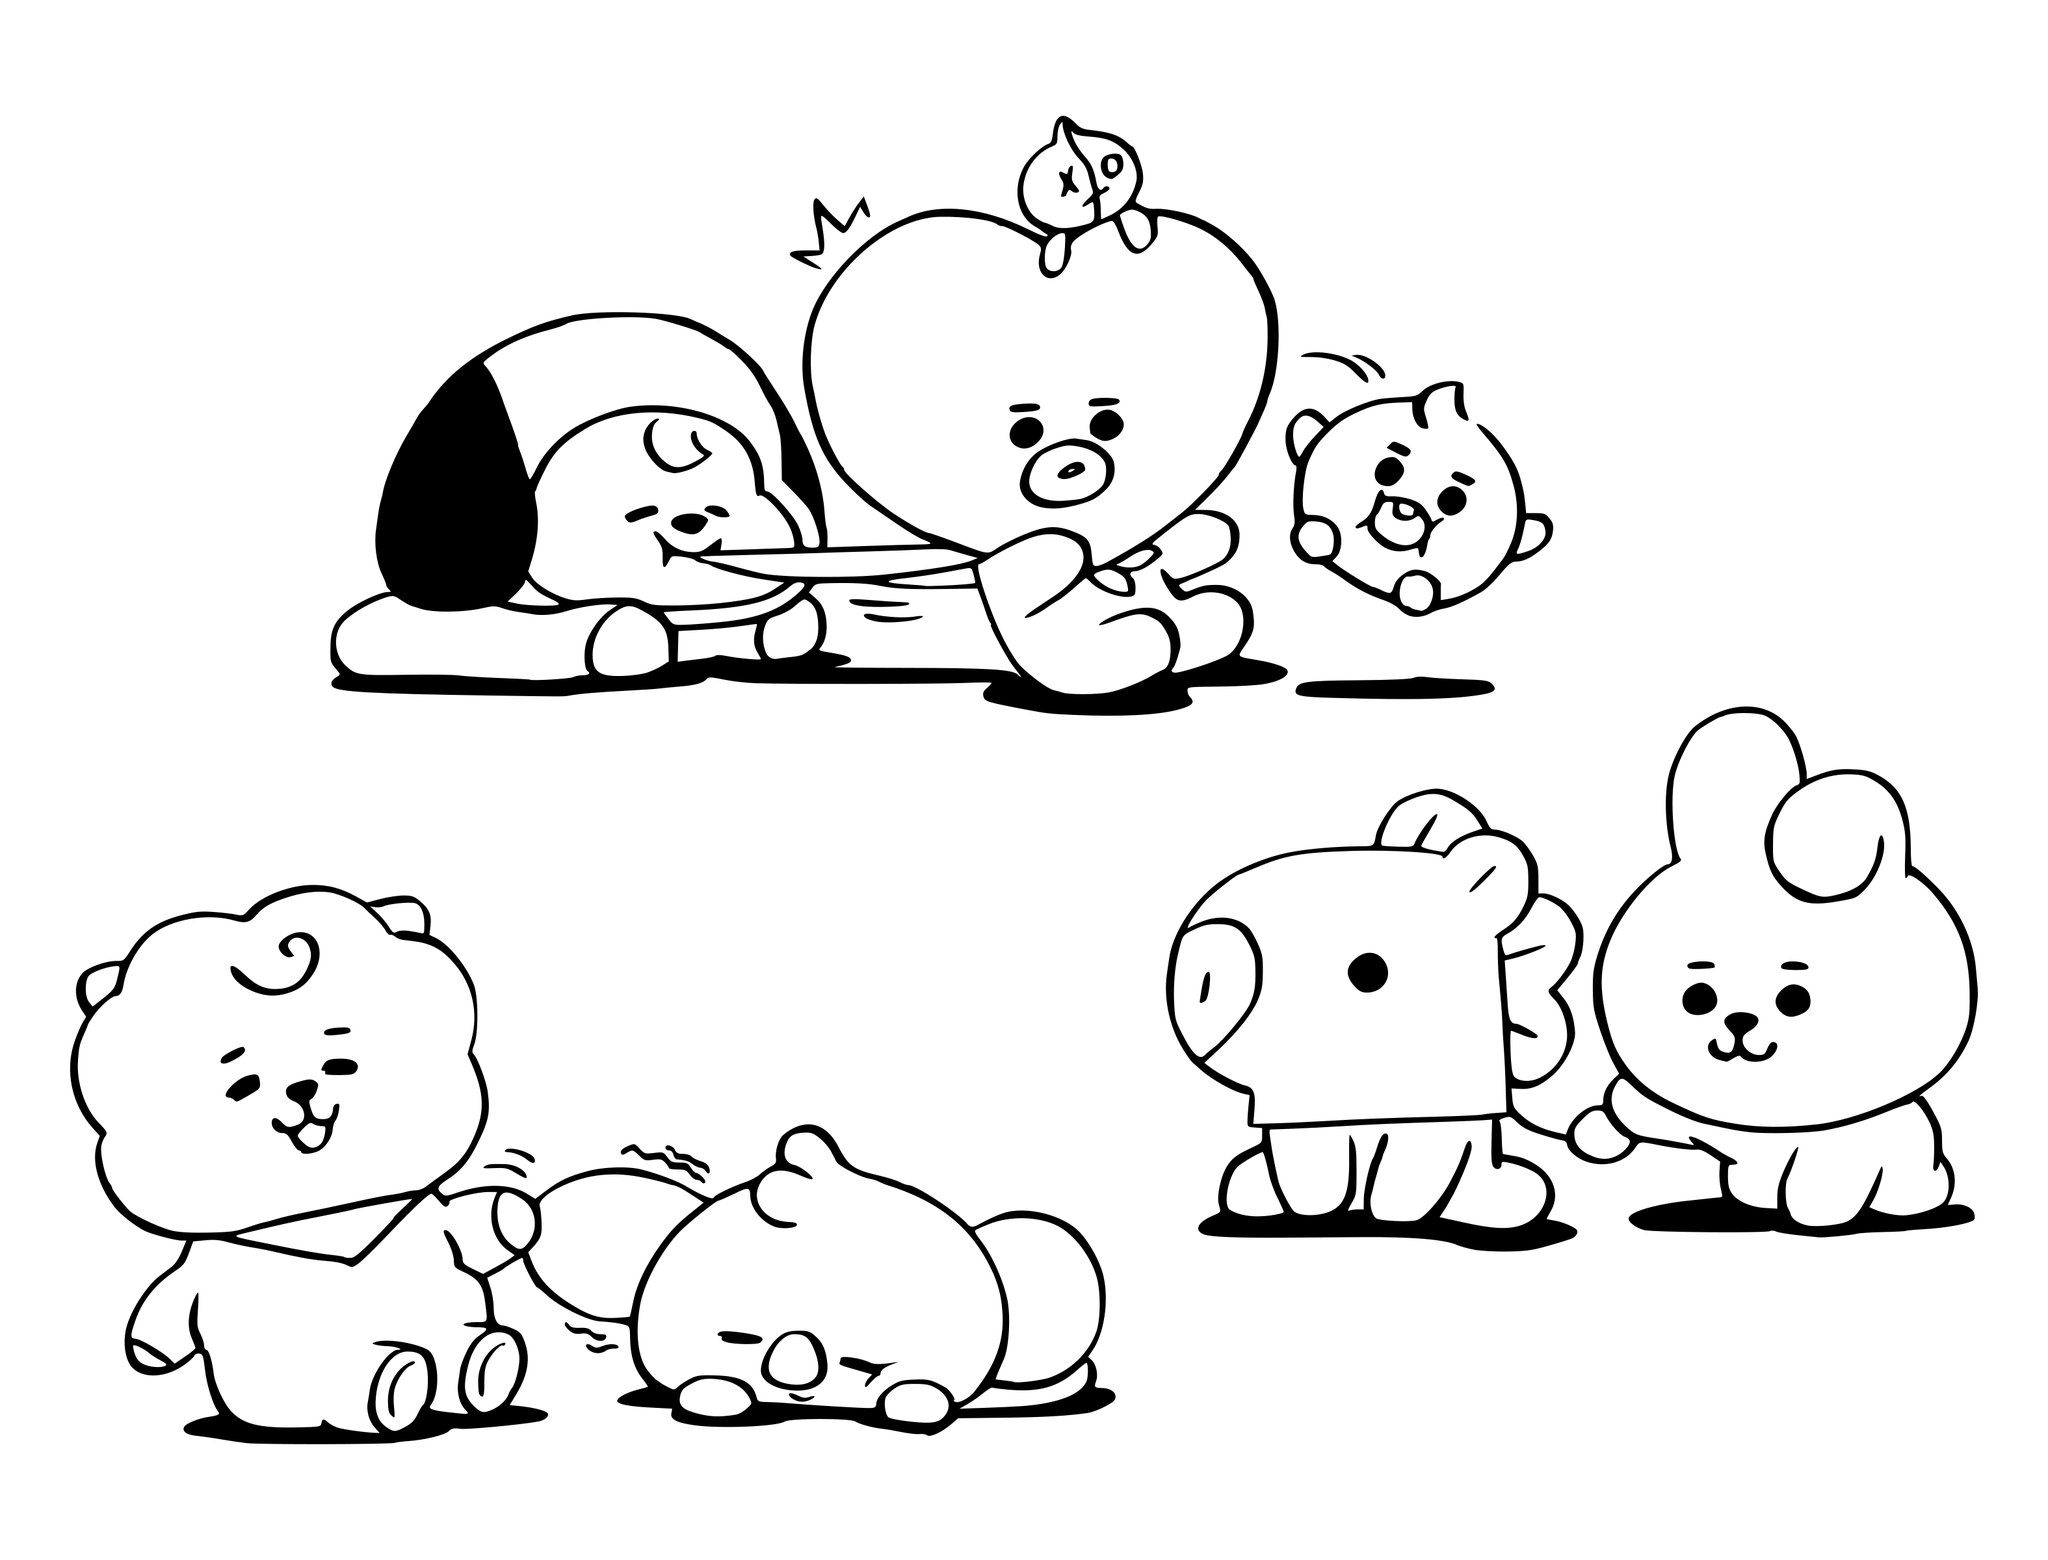 500 Coloring Pages Bt21 Free - Coloring Pages Printable